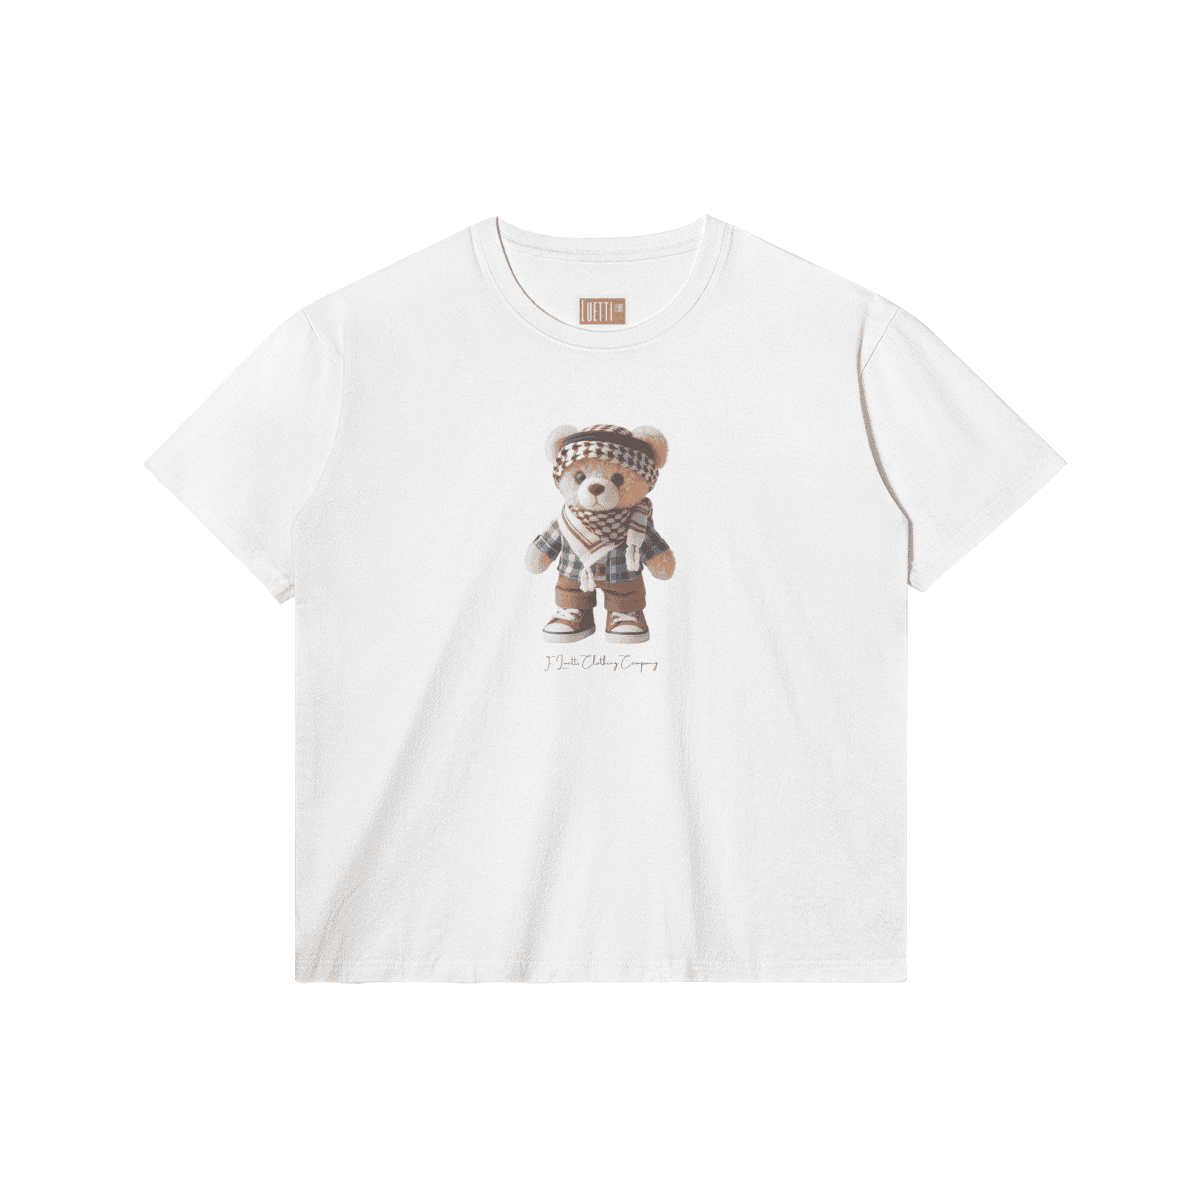 Pali Bear Adults Regular Fit Tee - 6 Colors Available